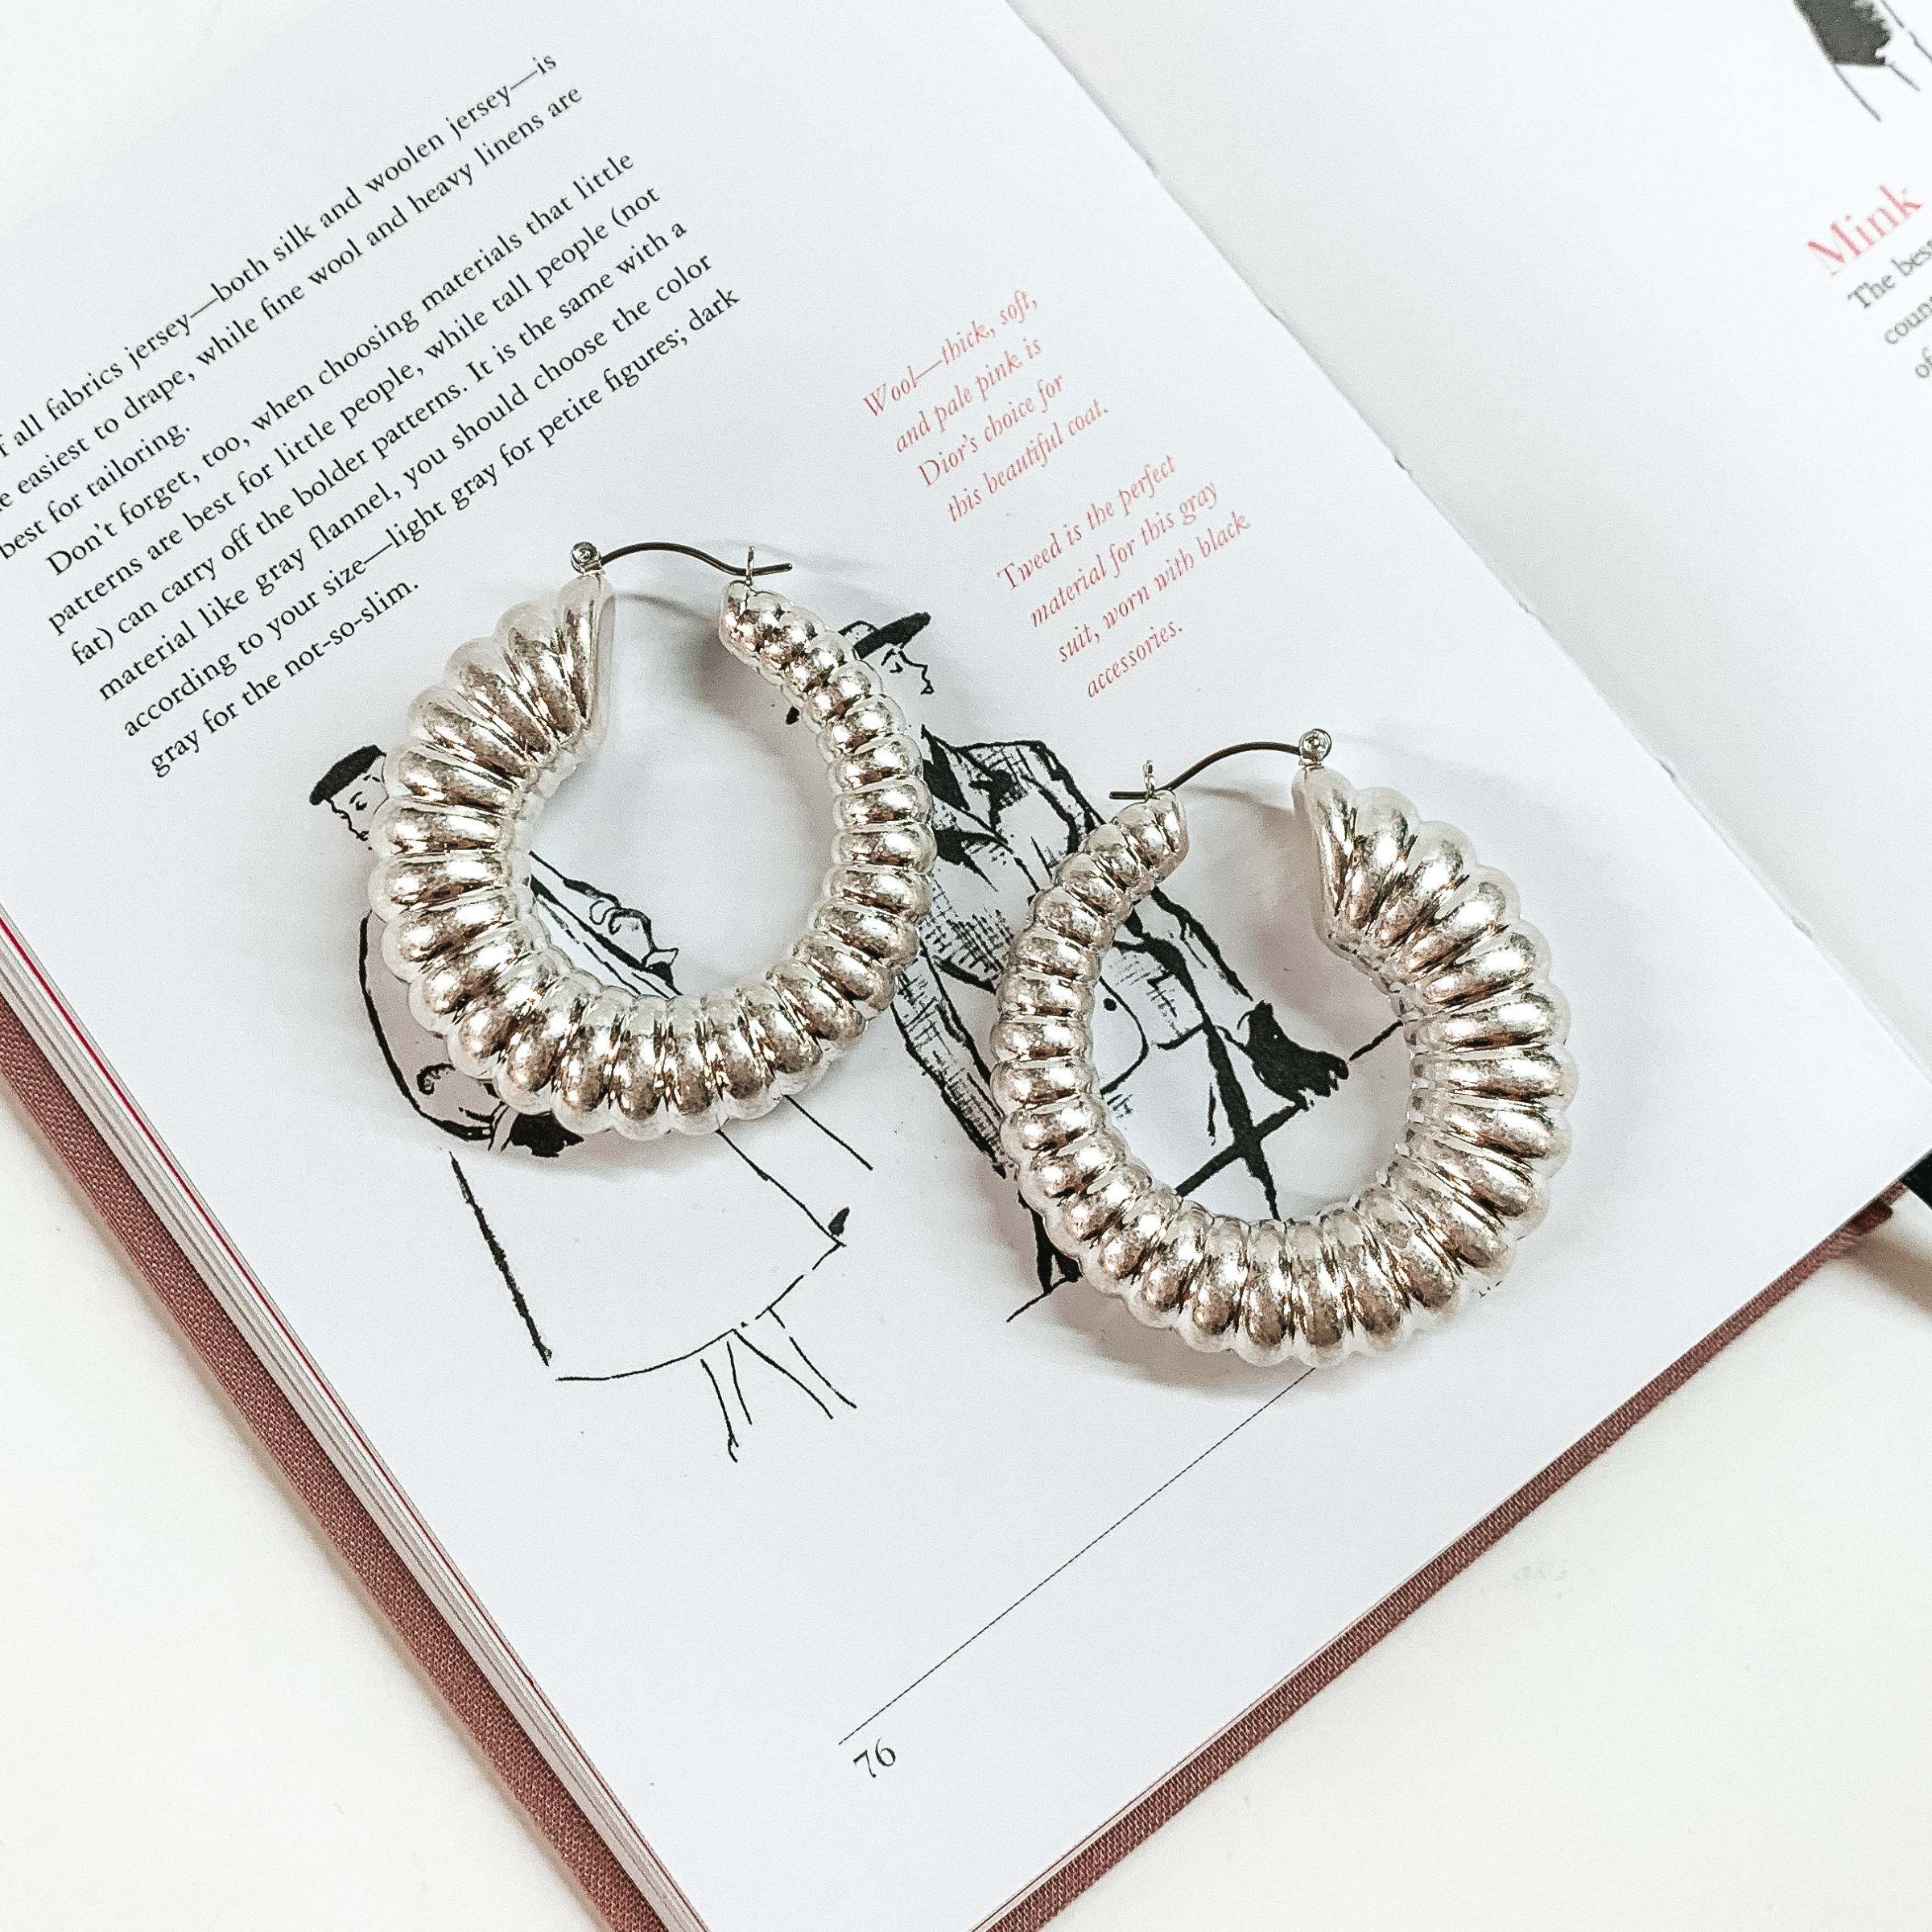 Silver hoop earrings pictured on top of an open book on a white background. 